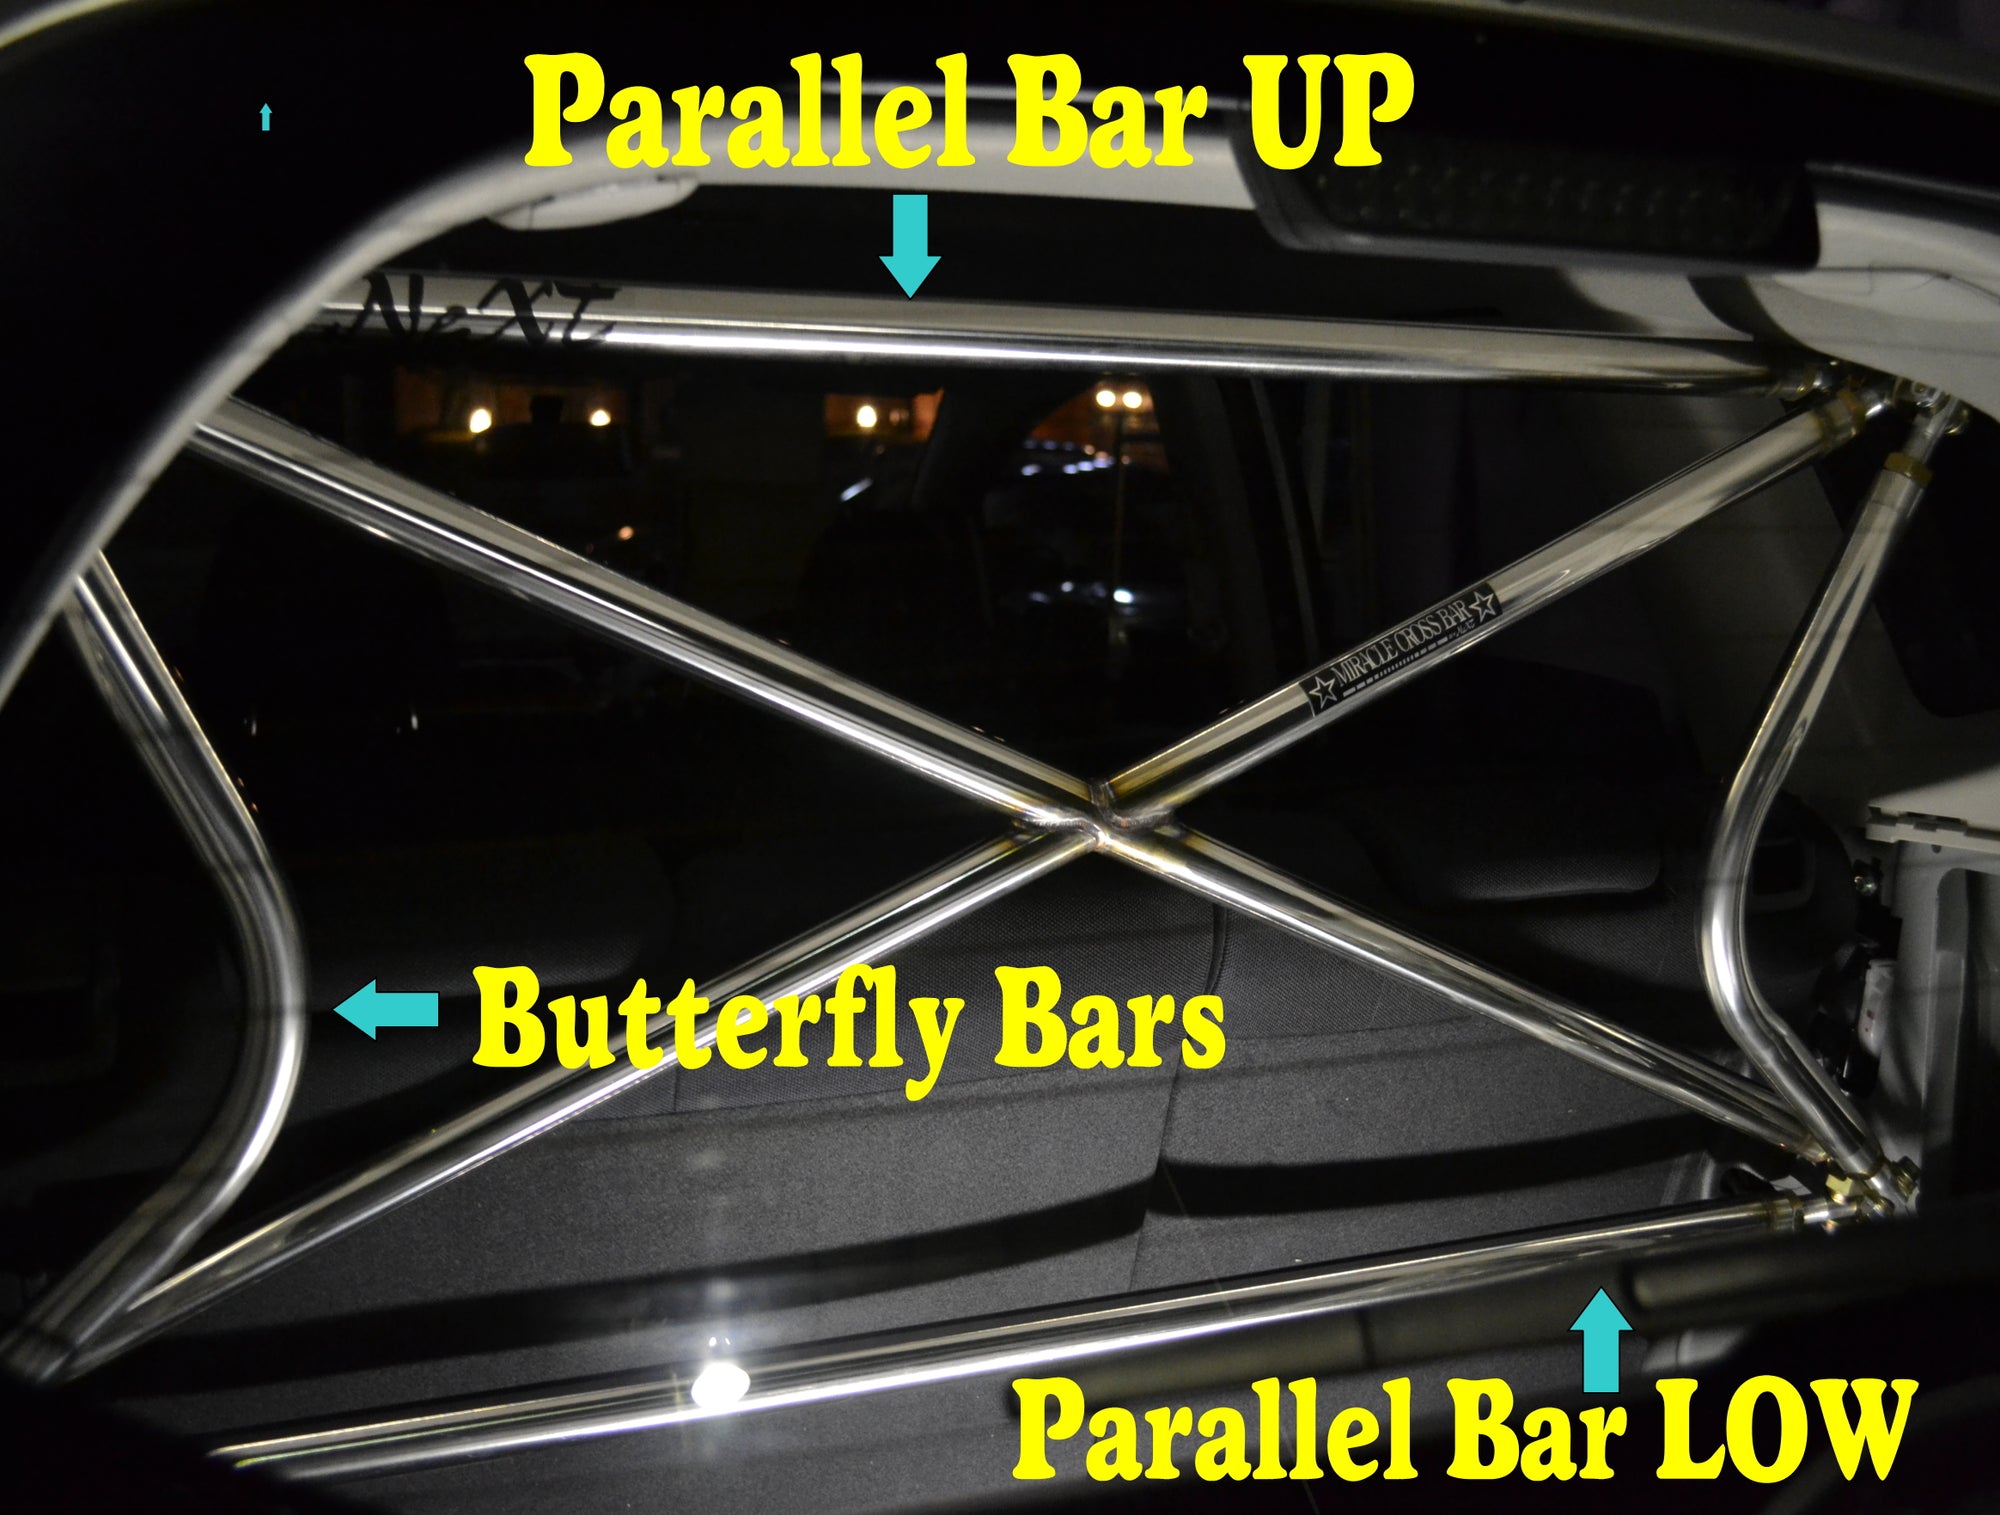 NEXT MIRACLE CROSS BAR PARALLEL BAR UP STAINLESS 32 FOR DAIHATSU ESSE 3DR 5DR NEXT-01365